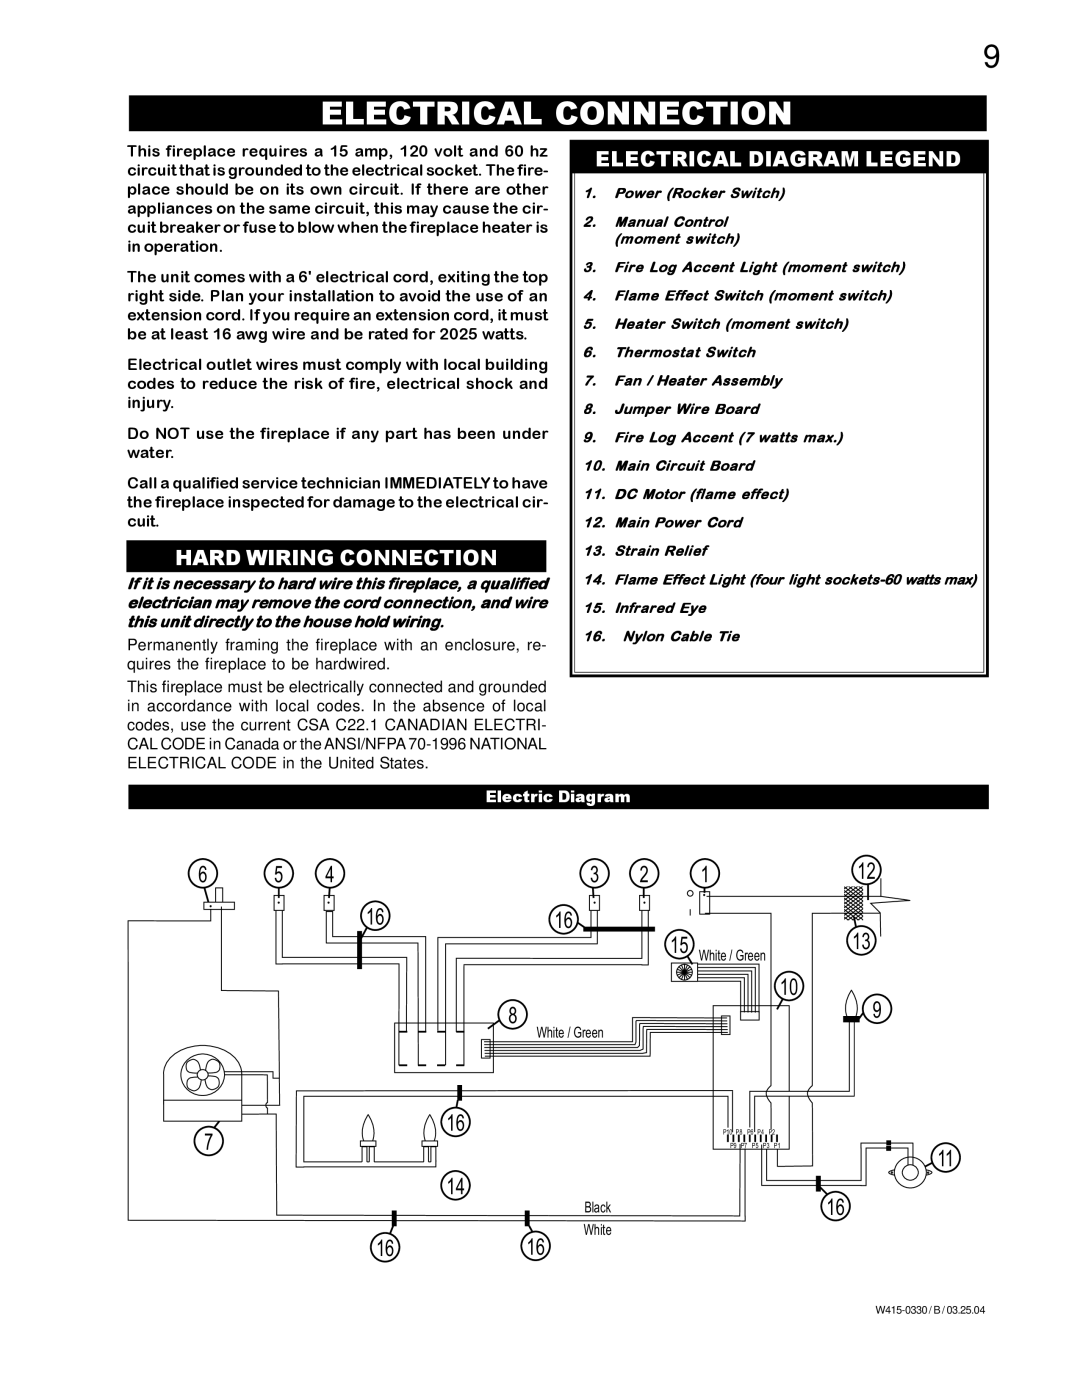 Napoleon Fireplaces EF38H manual Electrical Connection, Hard Wiring Connection, Electrical Diagram Legend 